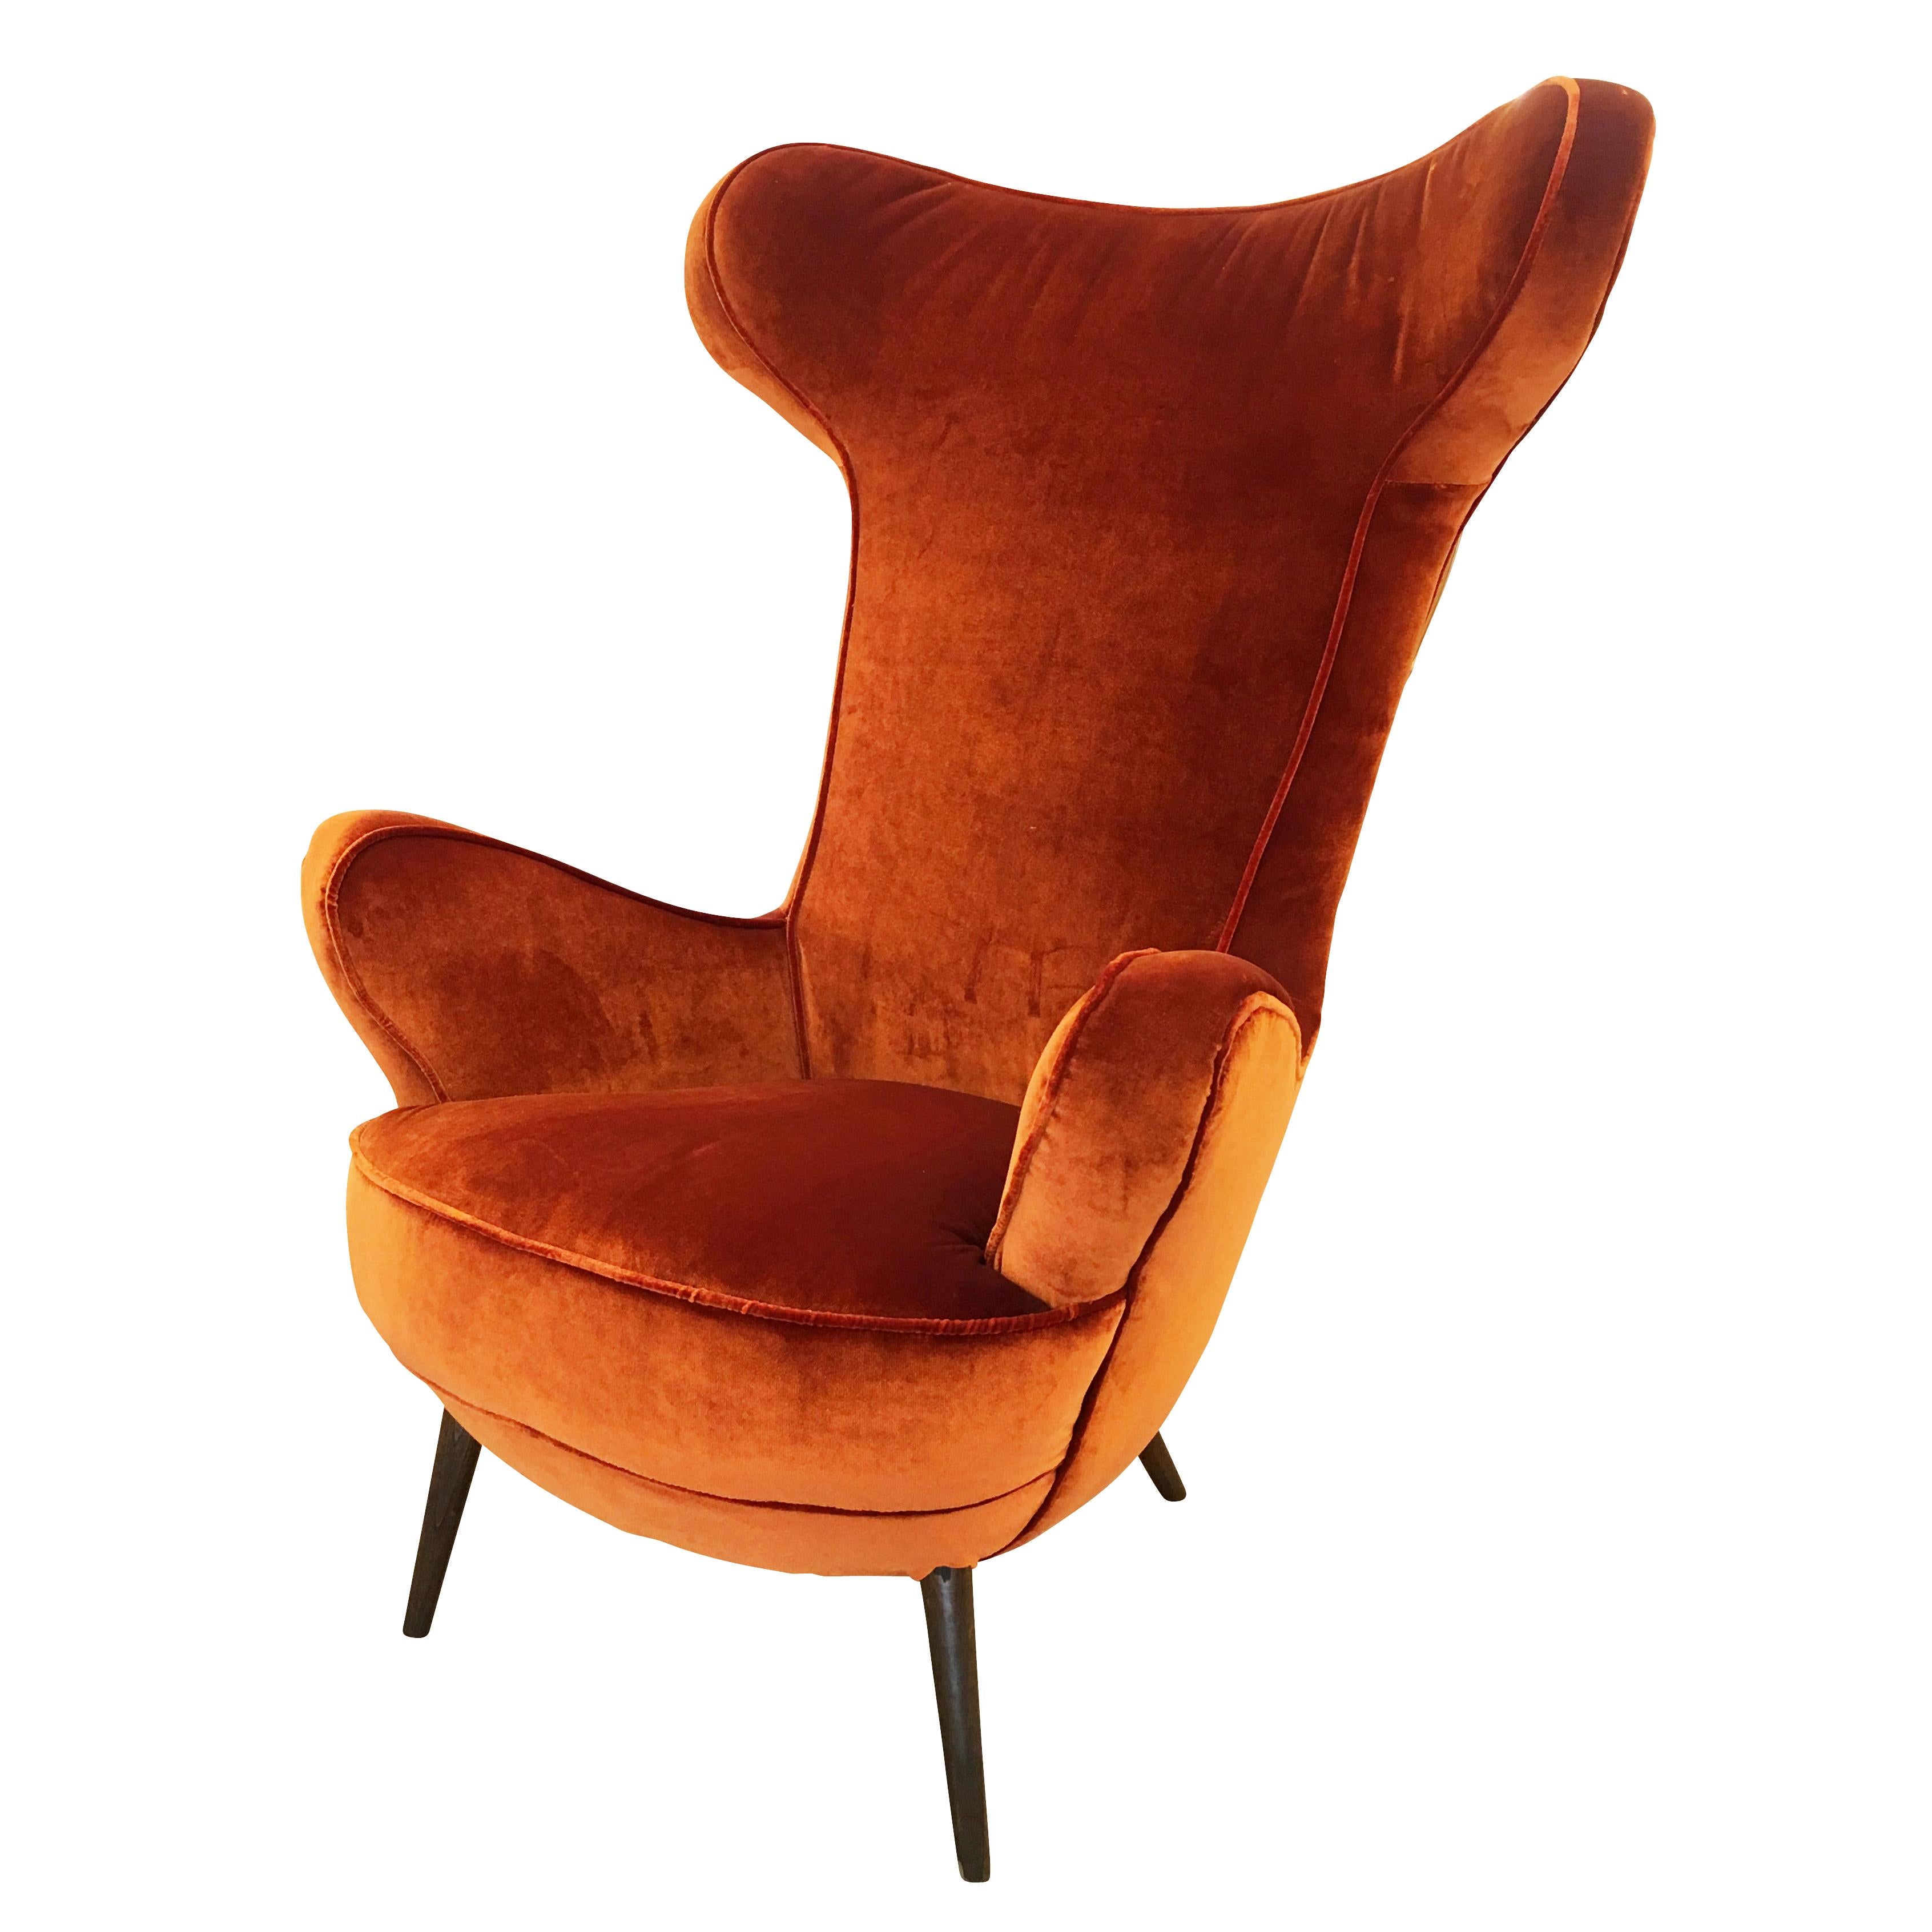 Sculptural Italian lounge chair in the style of Carlo Mollino. Features a high back with rounded open wings, the armrests continue the same pattern. Elongated wood legs.